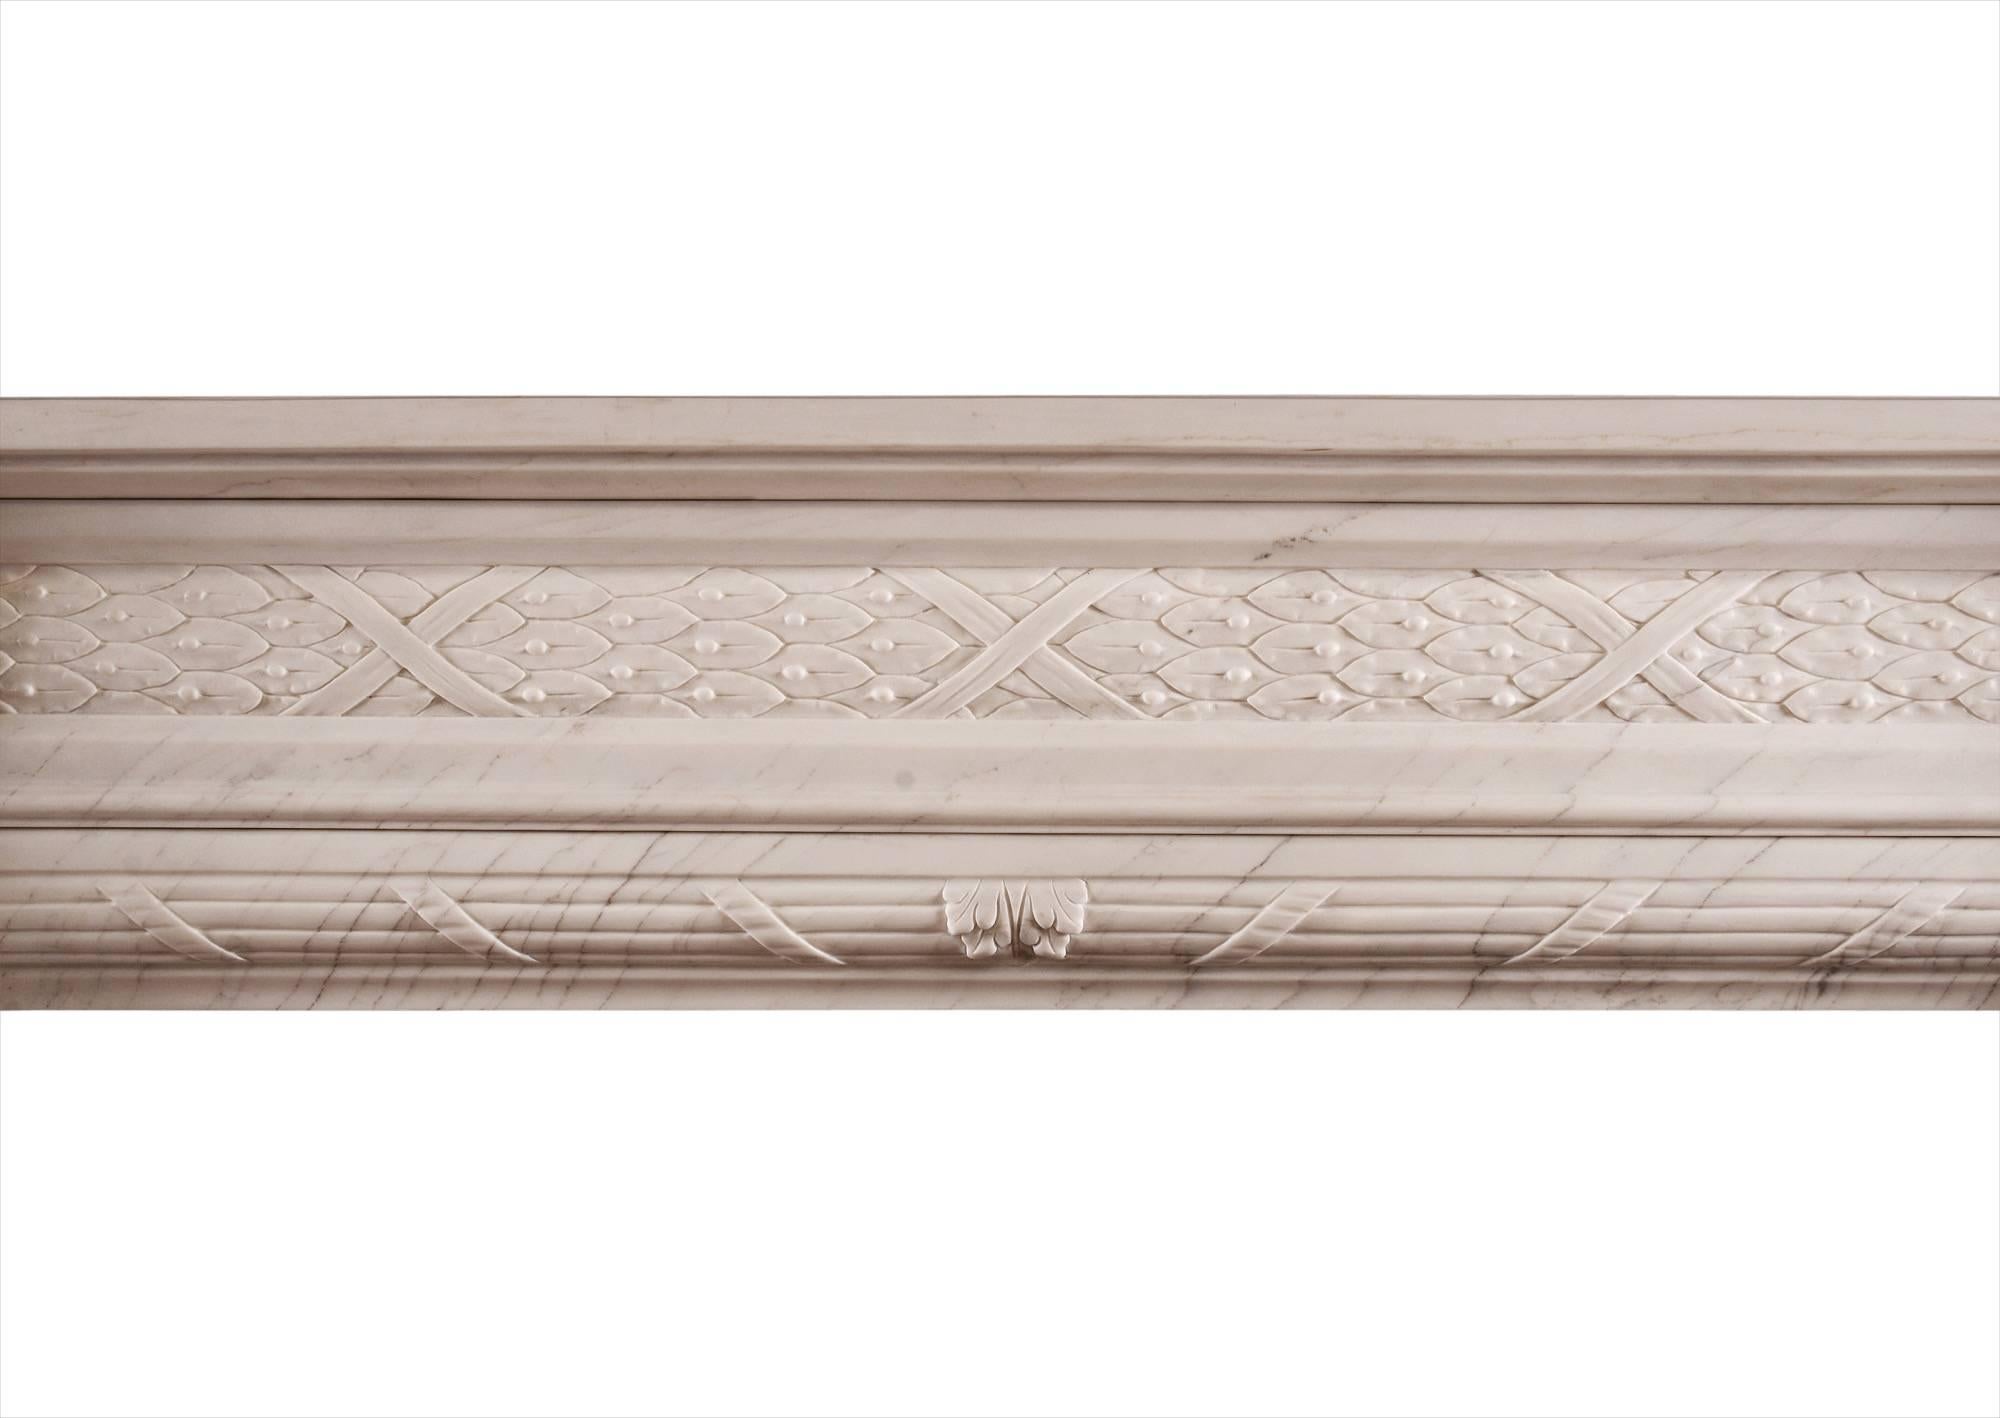 A good quality French Louis XVI style fireplace in white marble. The carved frieze with leaves bound by ribbons, the jambs with half rounded columns with delicate carving to flutes, the ingrounds with reeding wrapped in ribbons. The jambs are